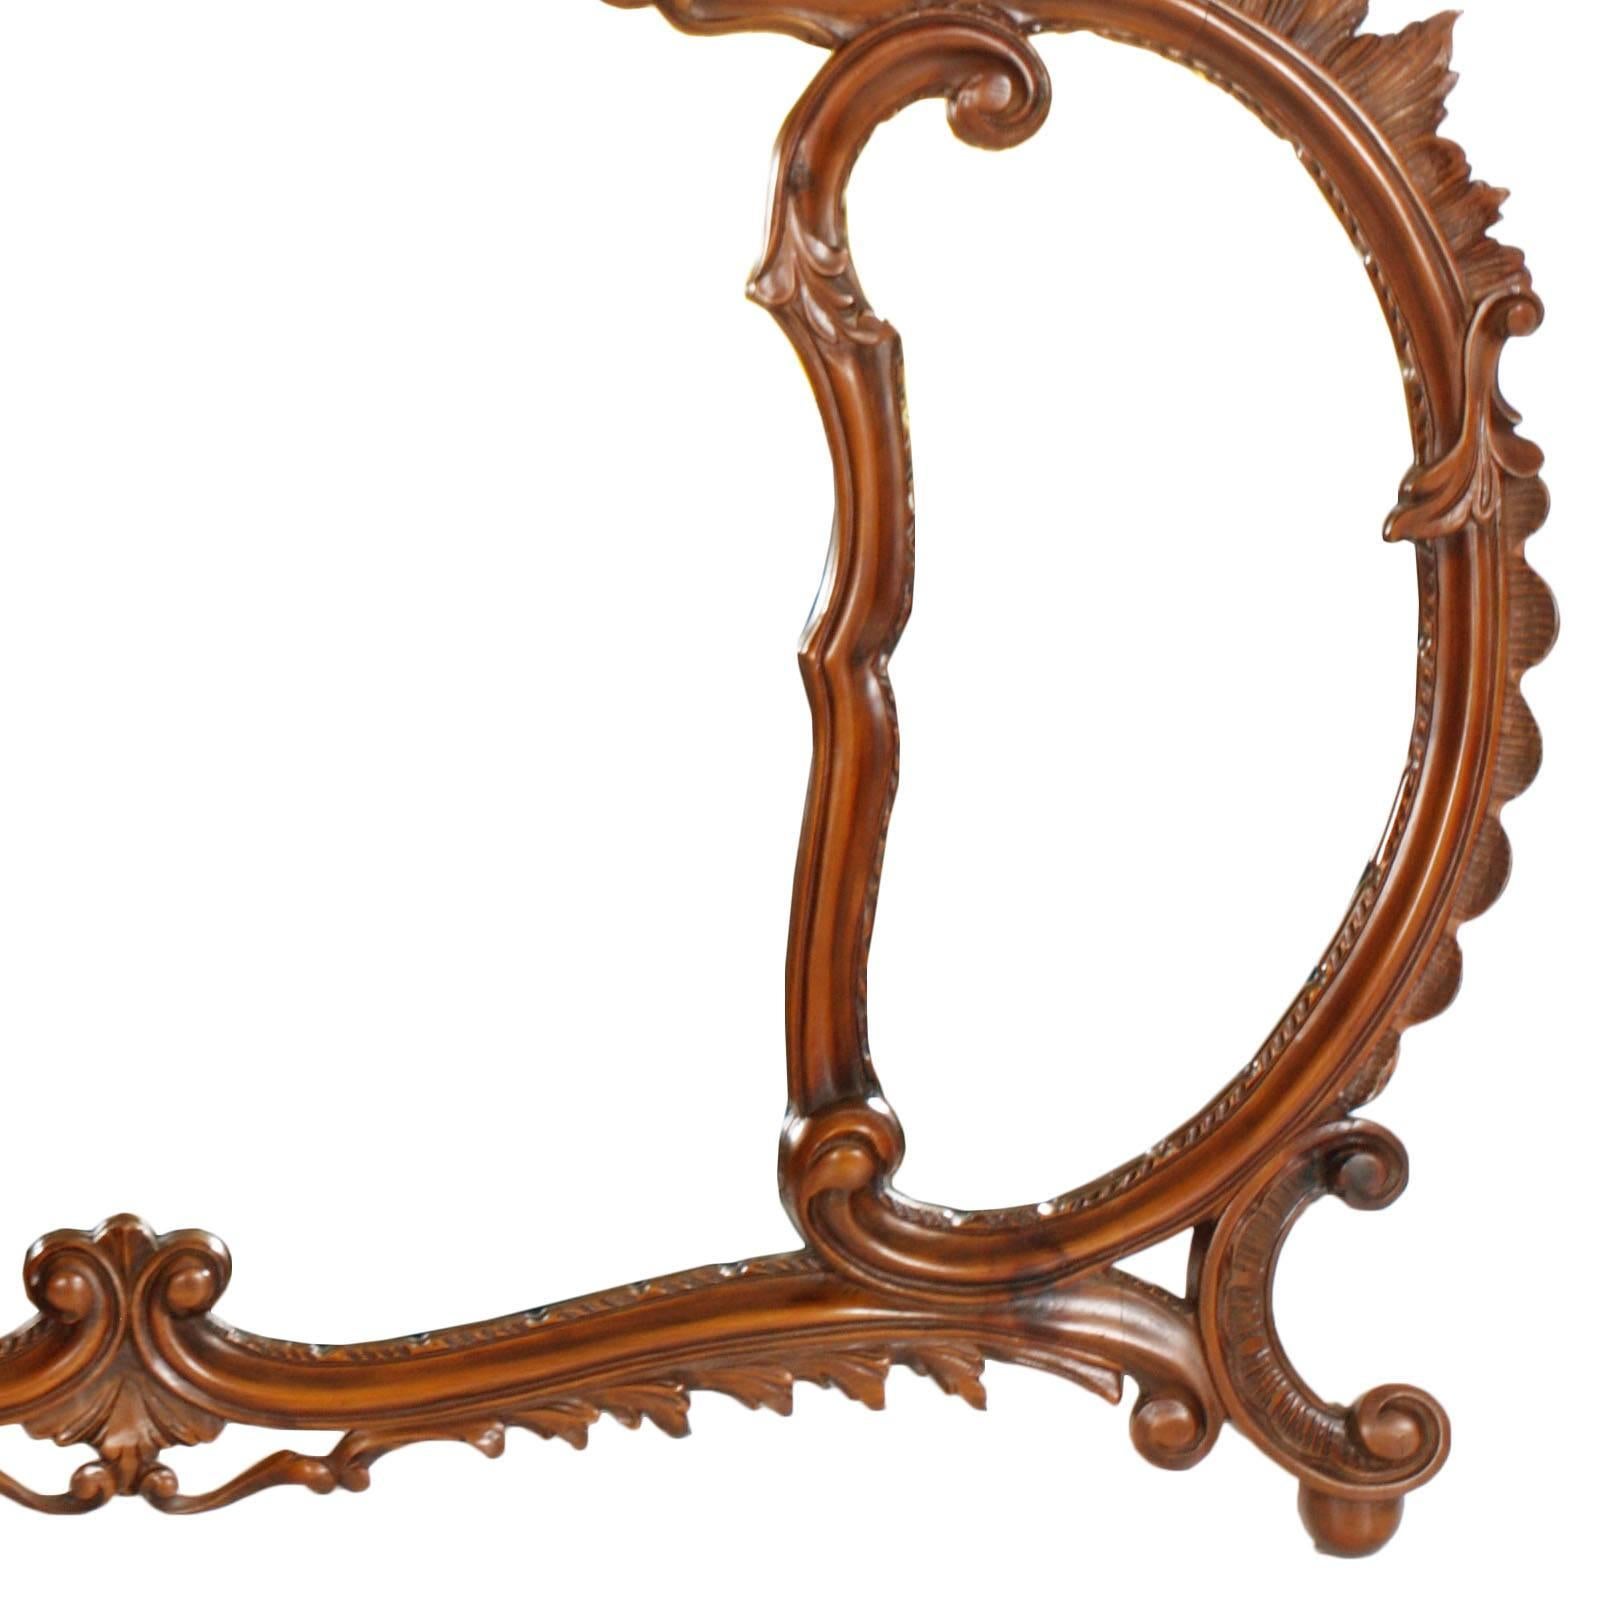 Rococo Revival Early 20th Century Venetian Wall Mirror, Carved Walnut, Testolini Attributed For Sale